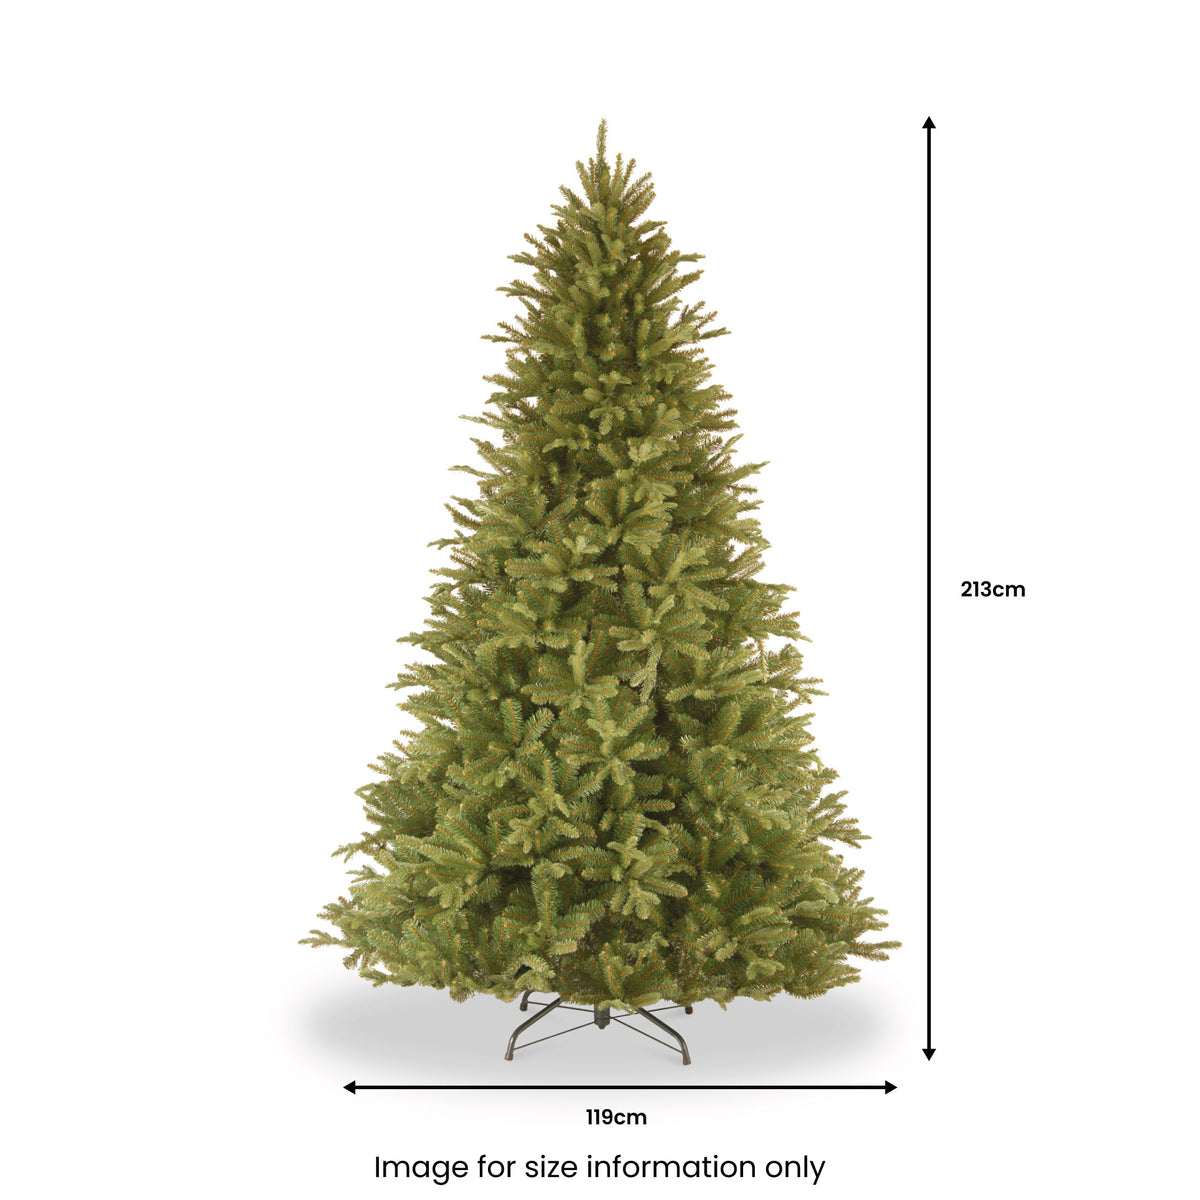 Tiffany Fir 7ft Christmas Tree from Roseland